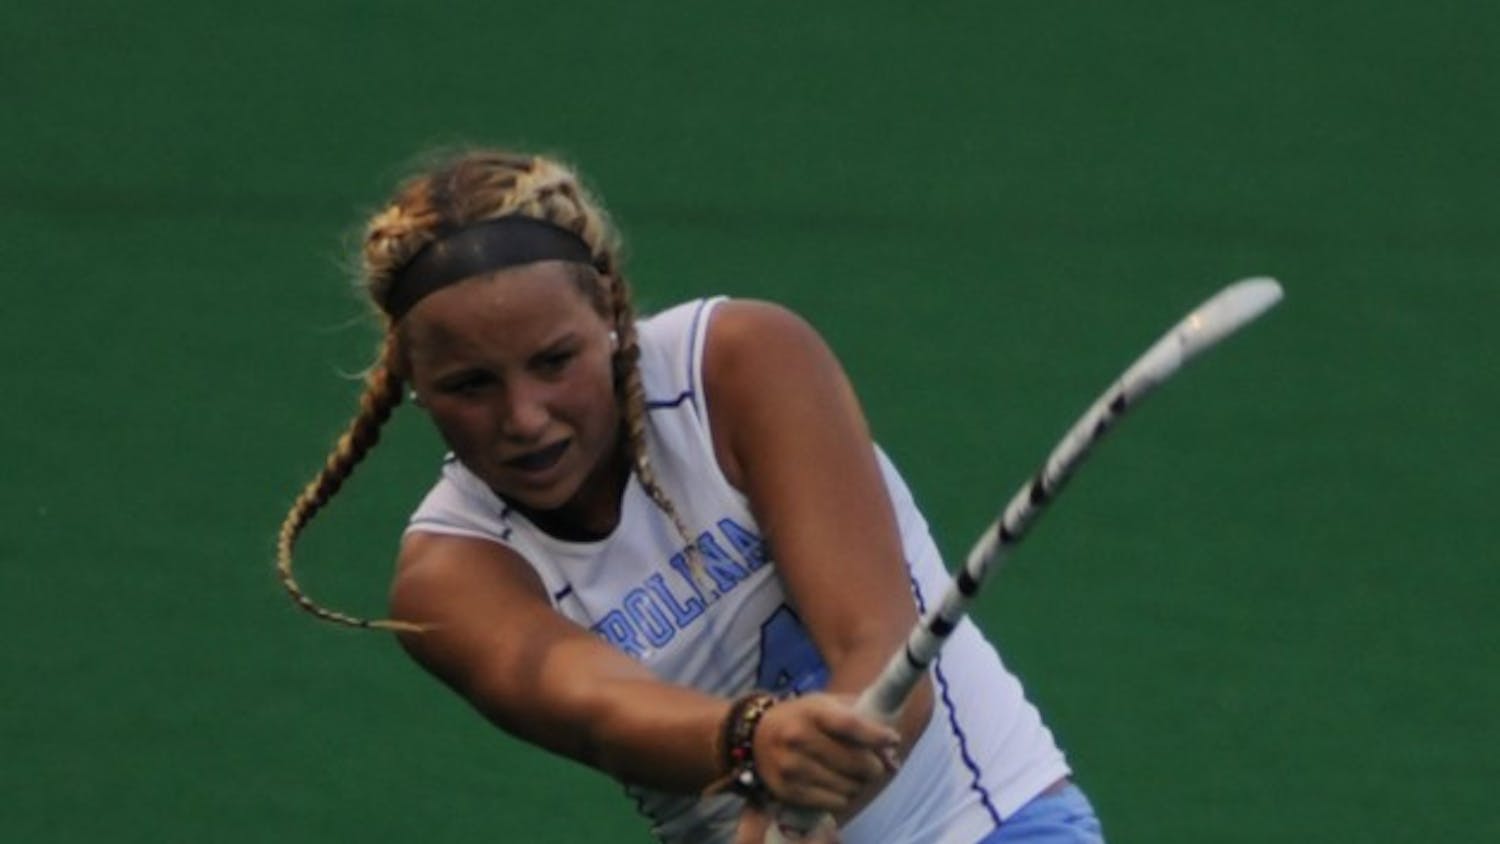 Kelsey Kolojejchick, who is the leading returning goal and point scorer, looks to help her team win its third national championship in four years.